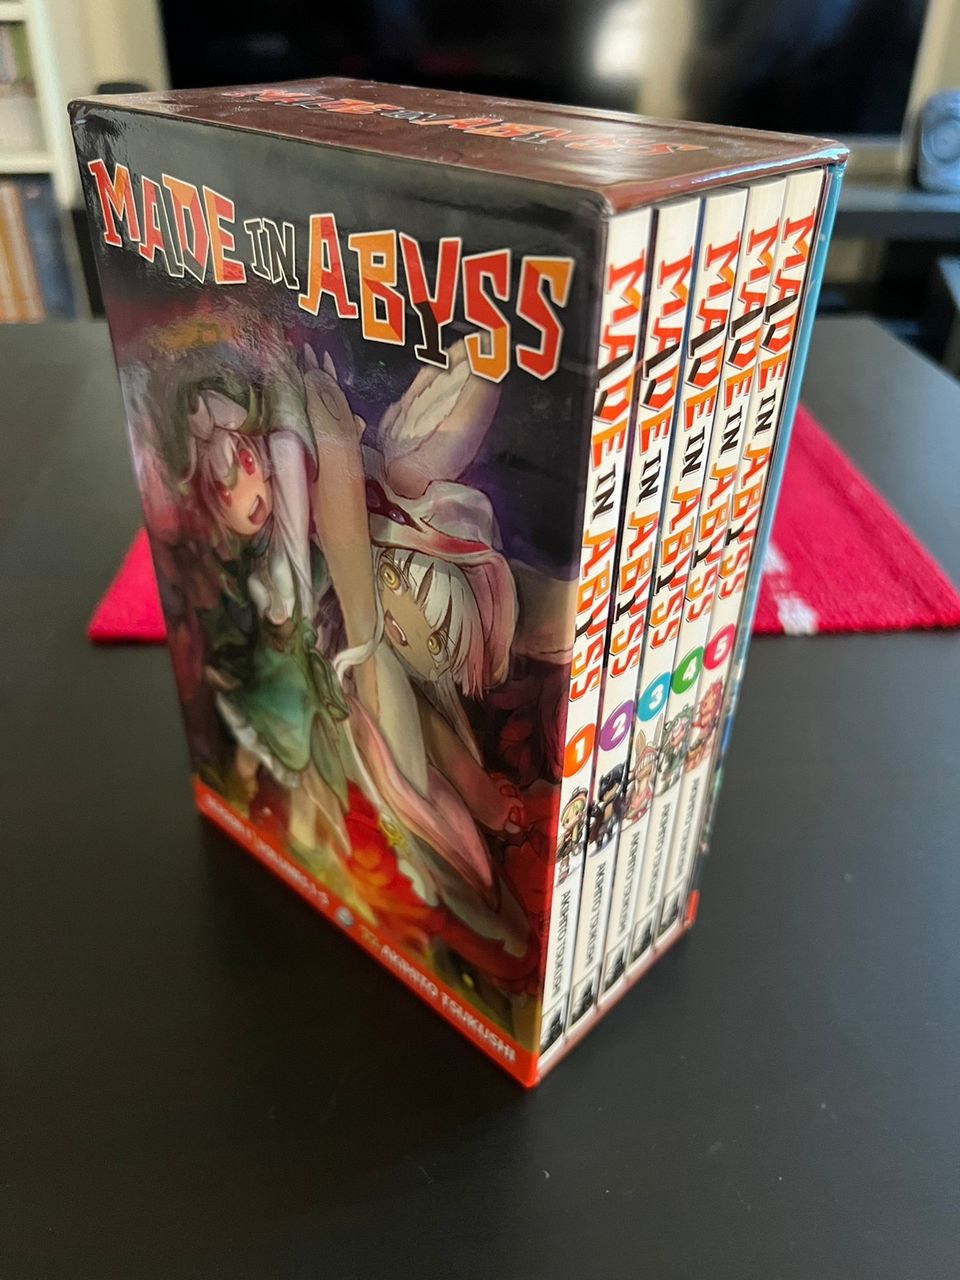 Made in abyss season 1 box set